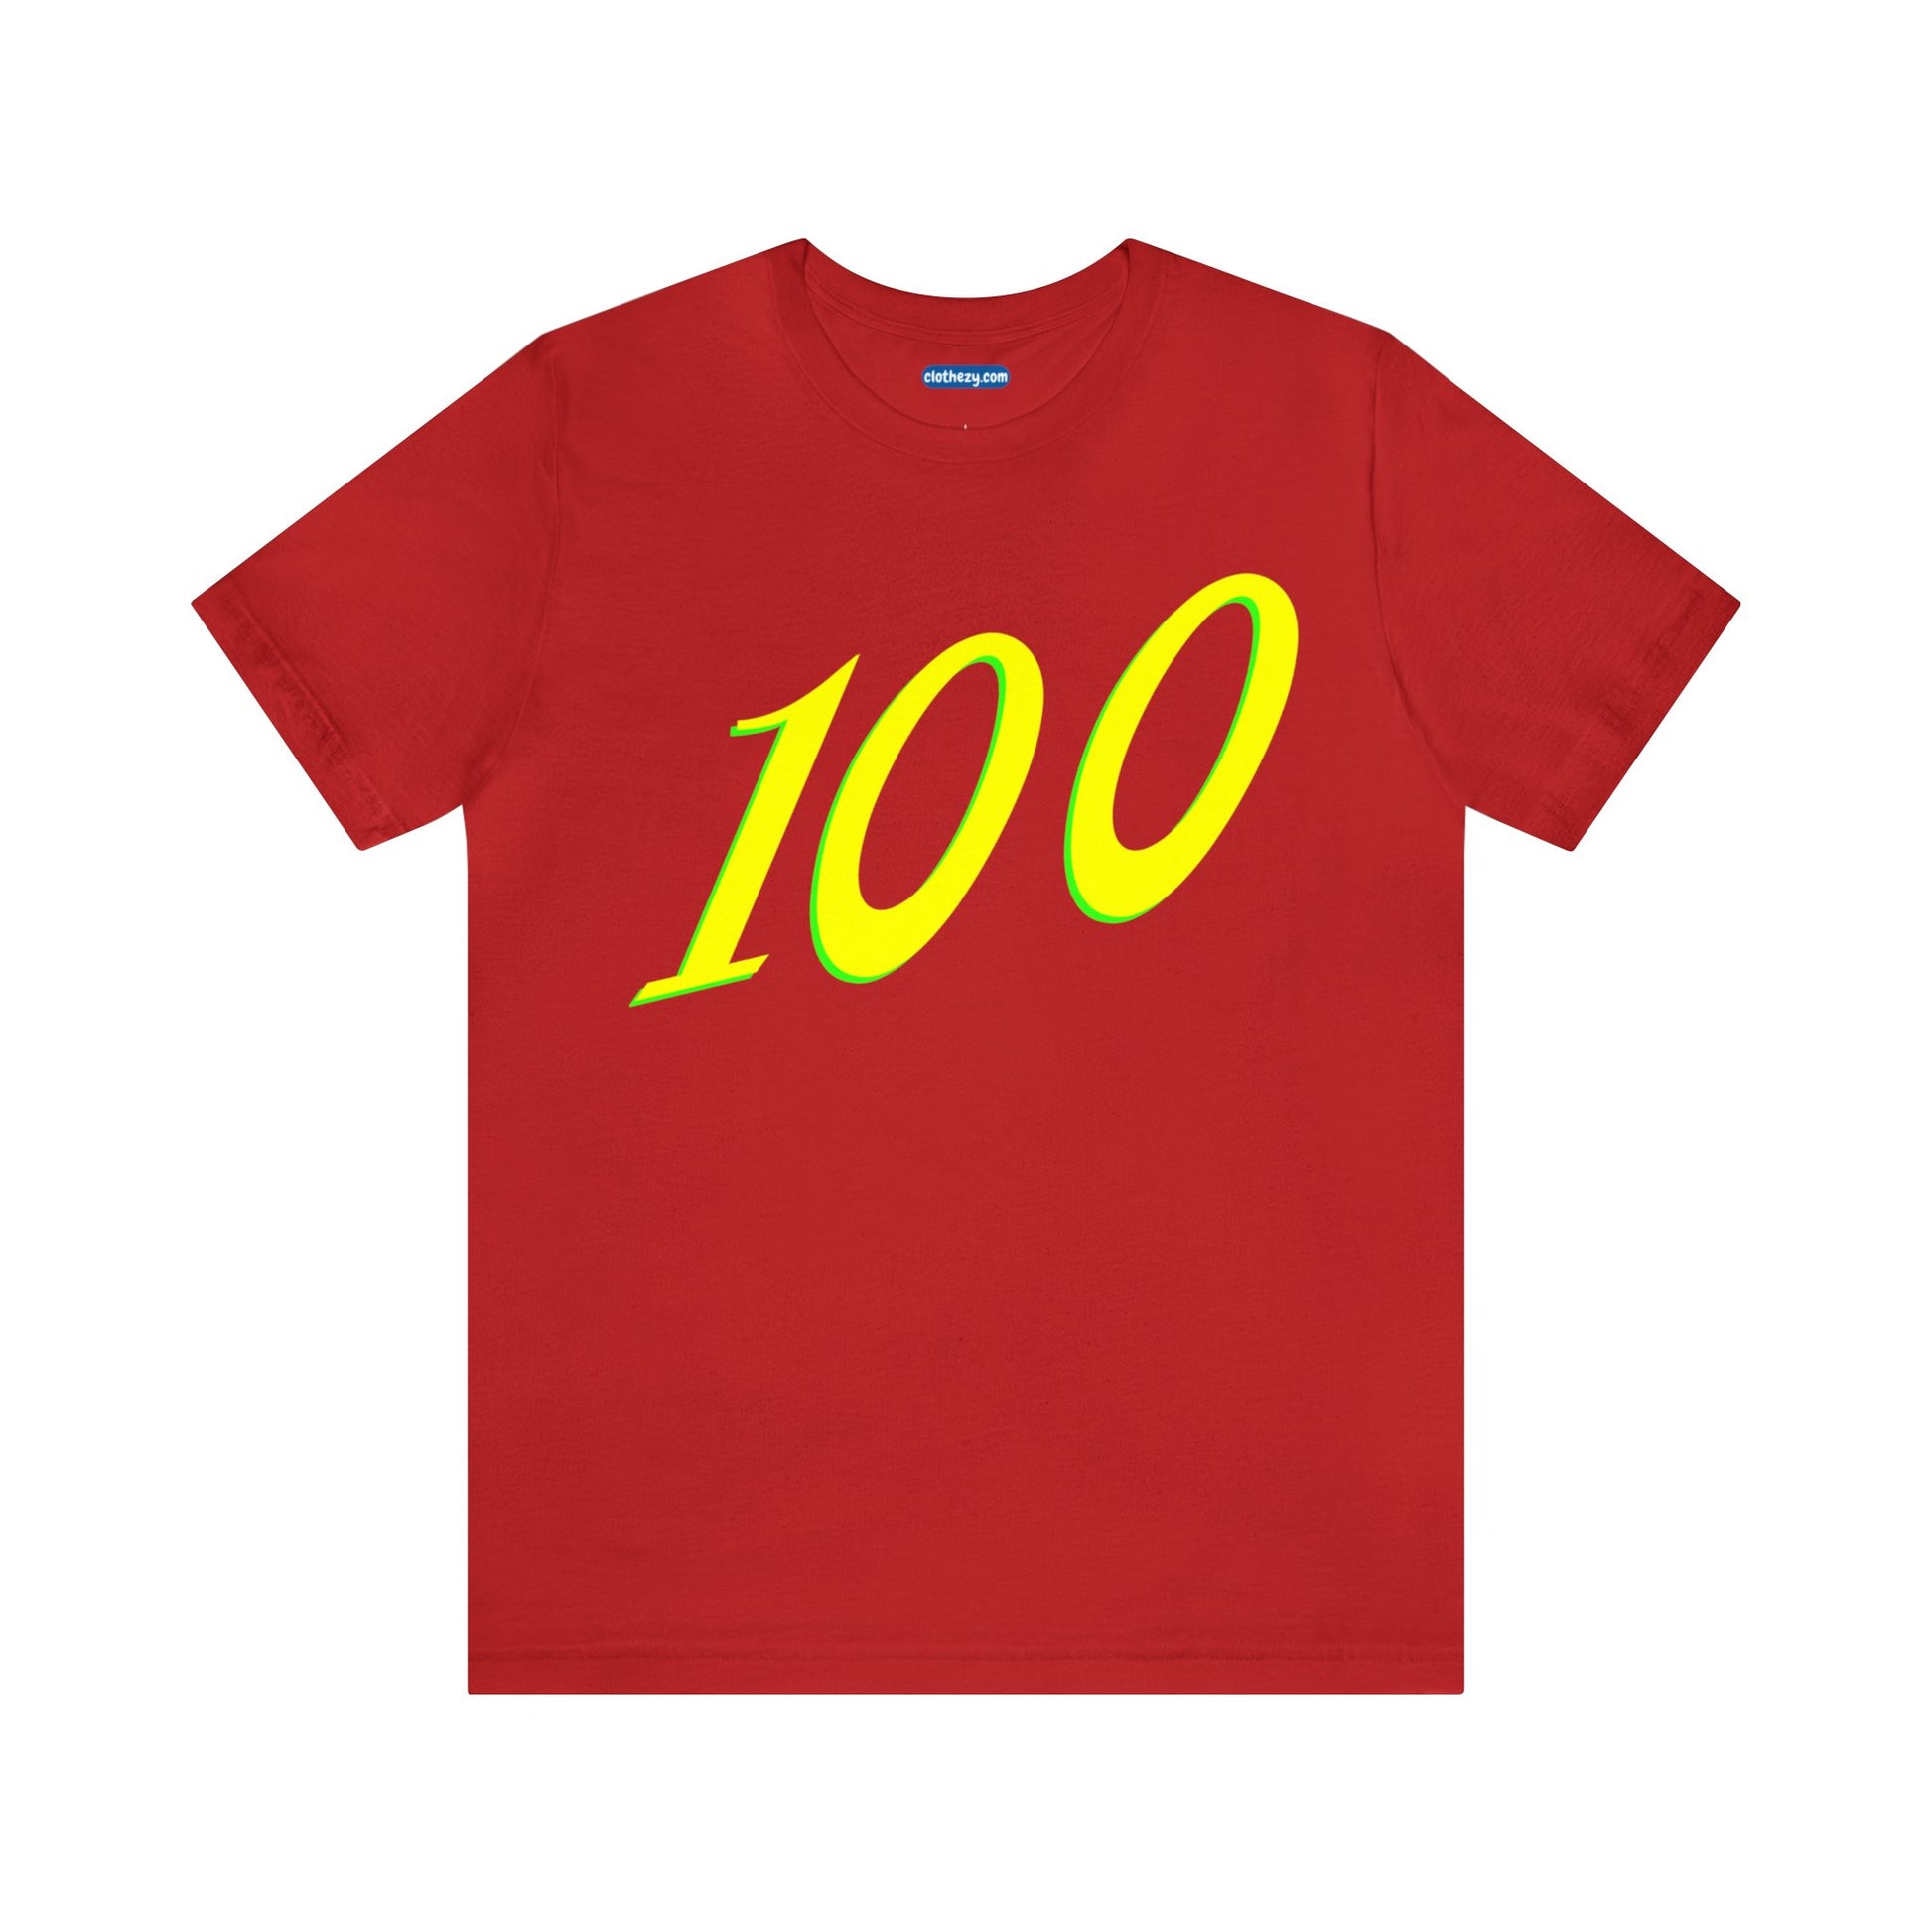 Number 100 Design - Soft Cotton Tee for birthdays and celebrations, Gift for friends and family, Multiple Options by clothezy.com in Red Size Small - Buy Now